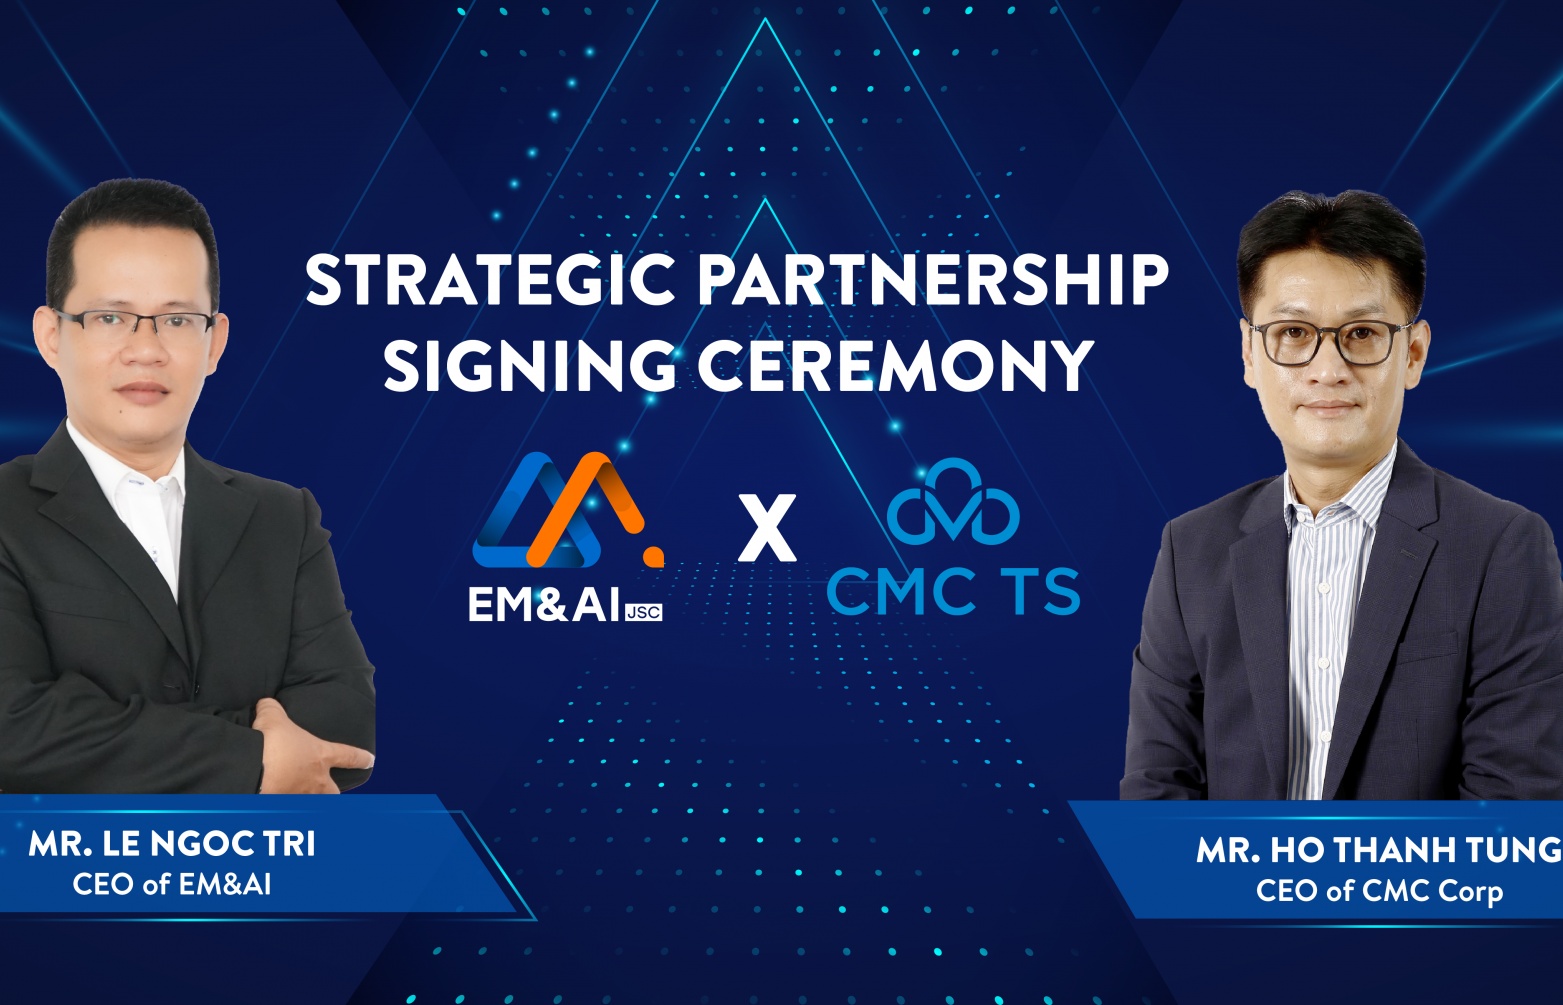 emai and cmc ts to accelerate ai applications among vietnamese firms